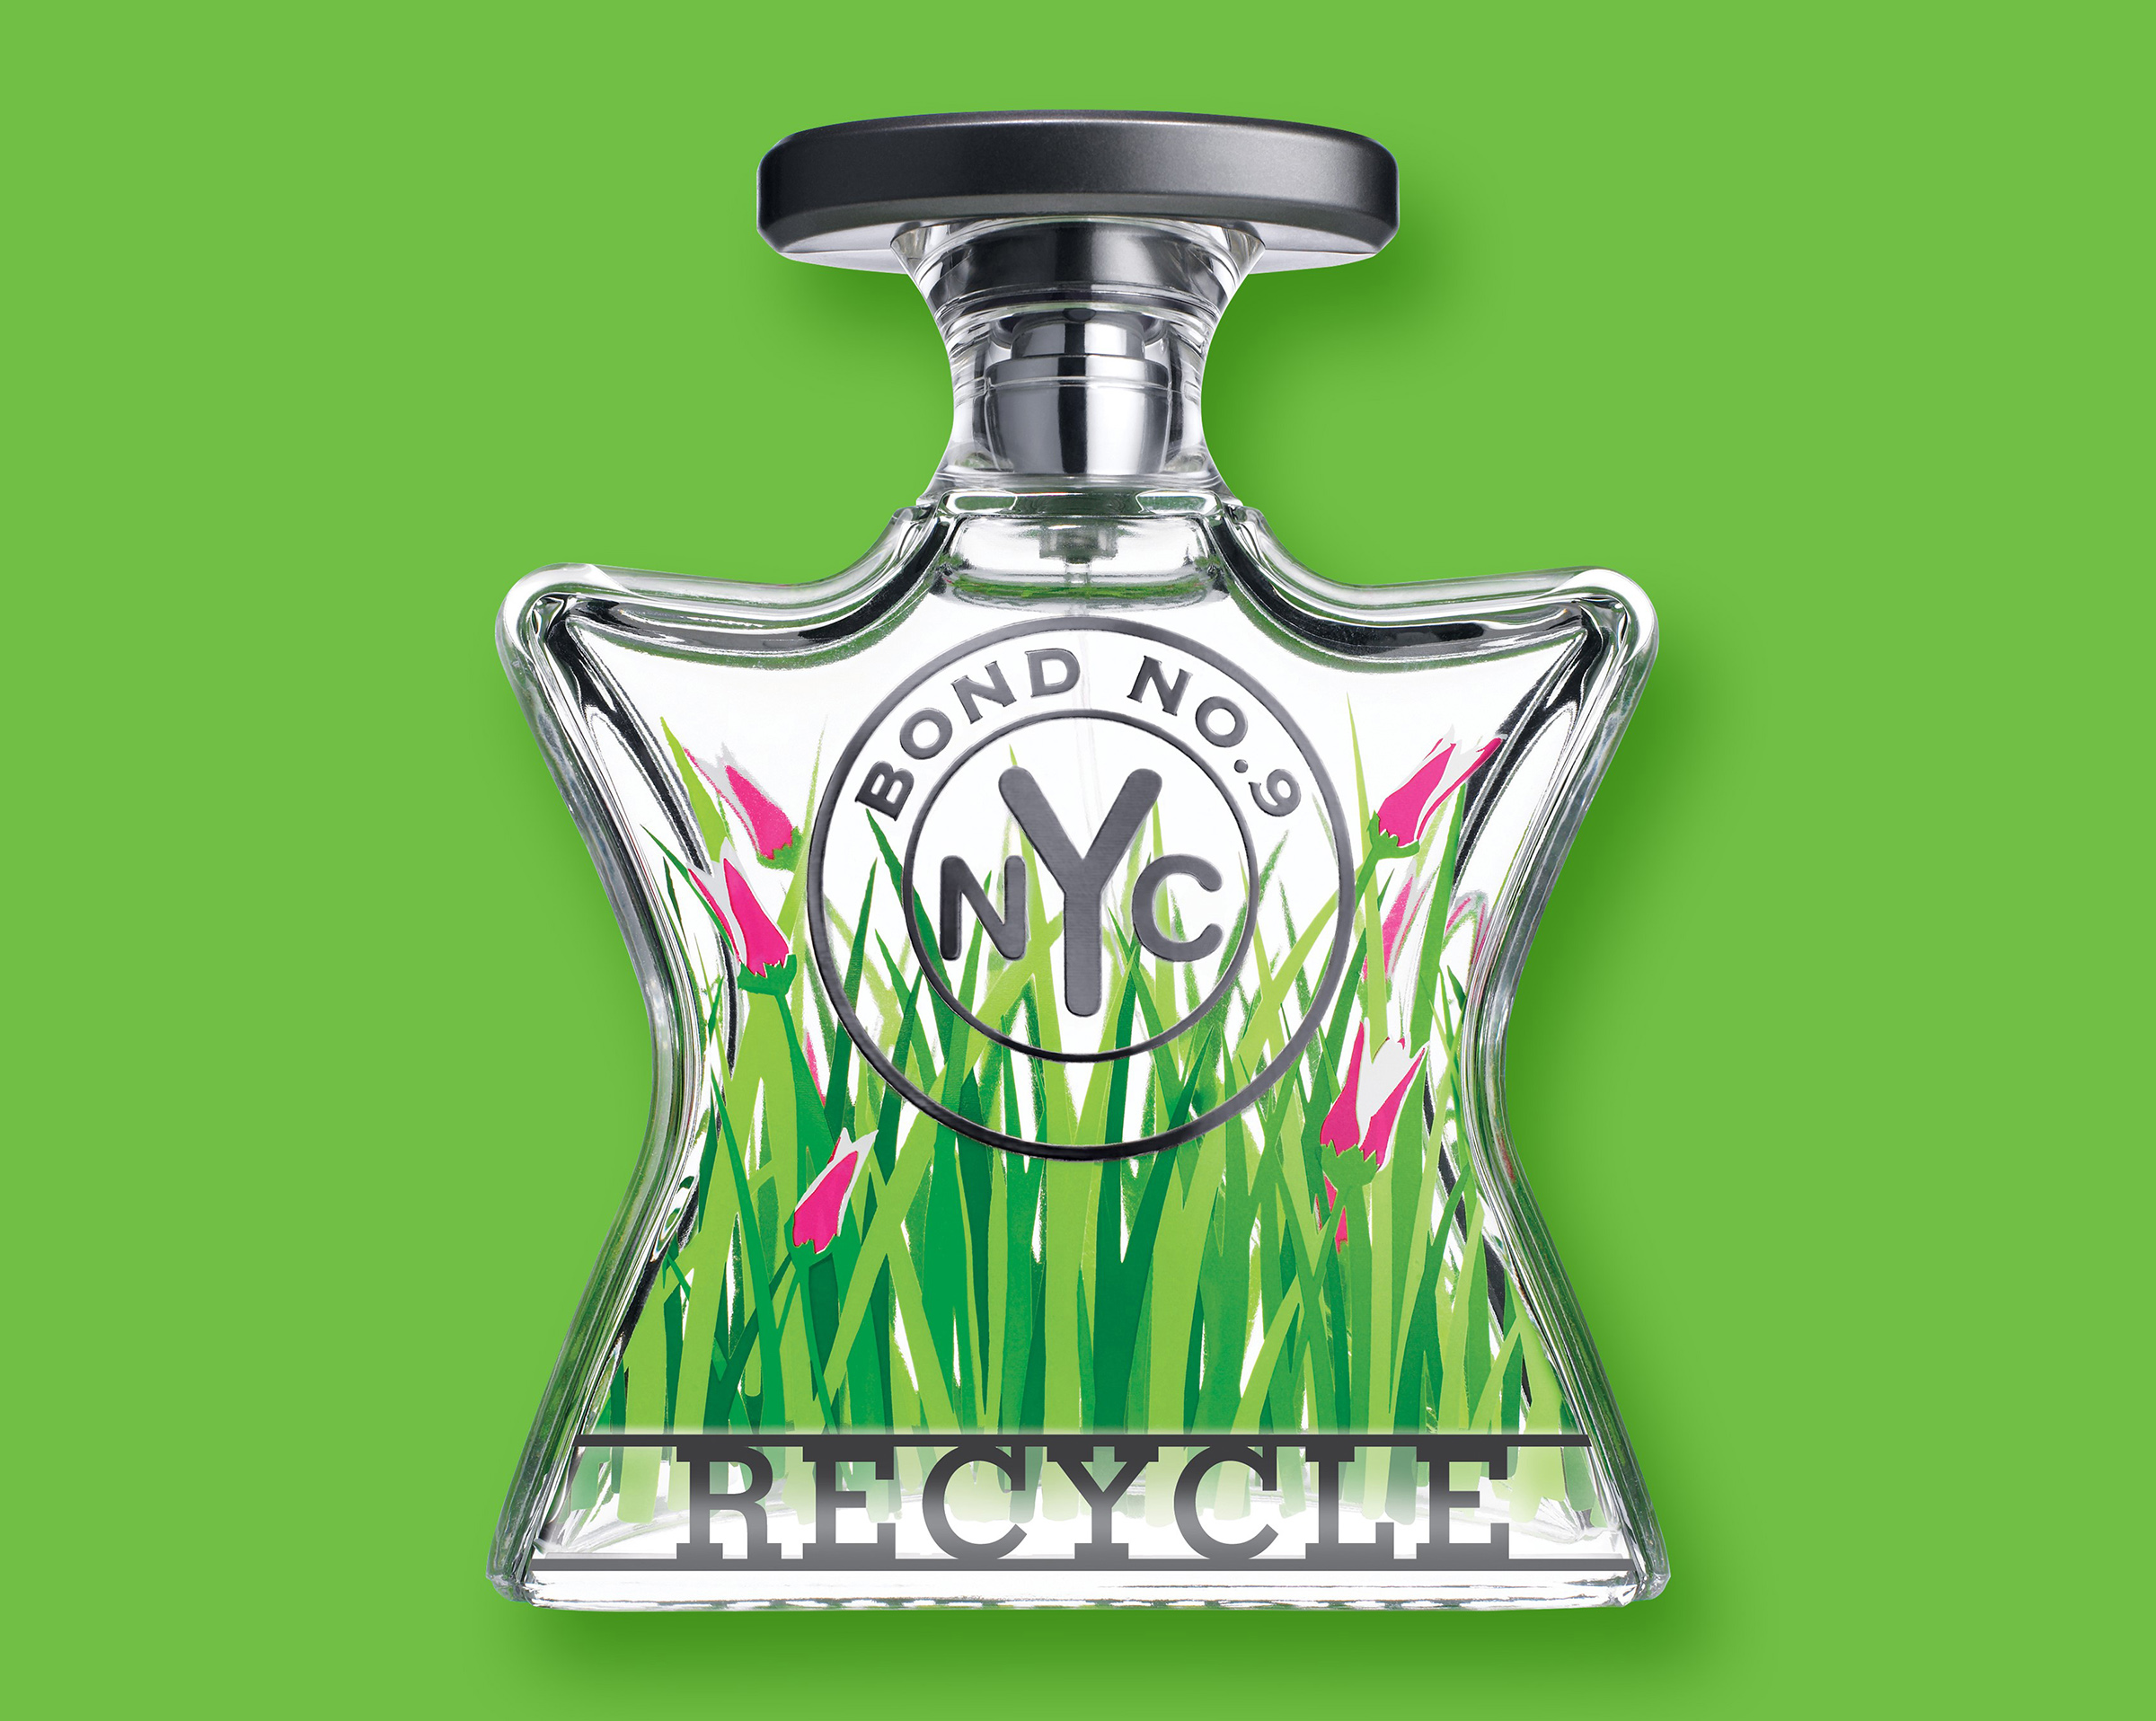 Bond No.9 green recycling background